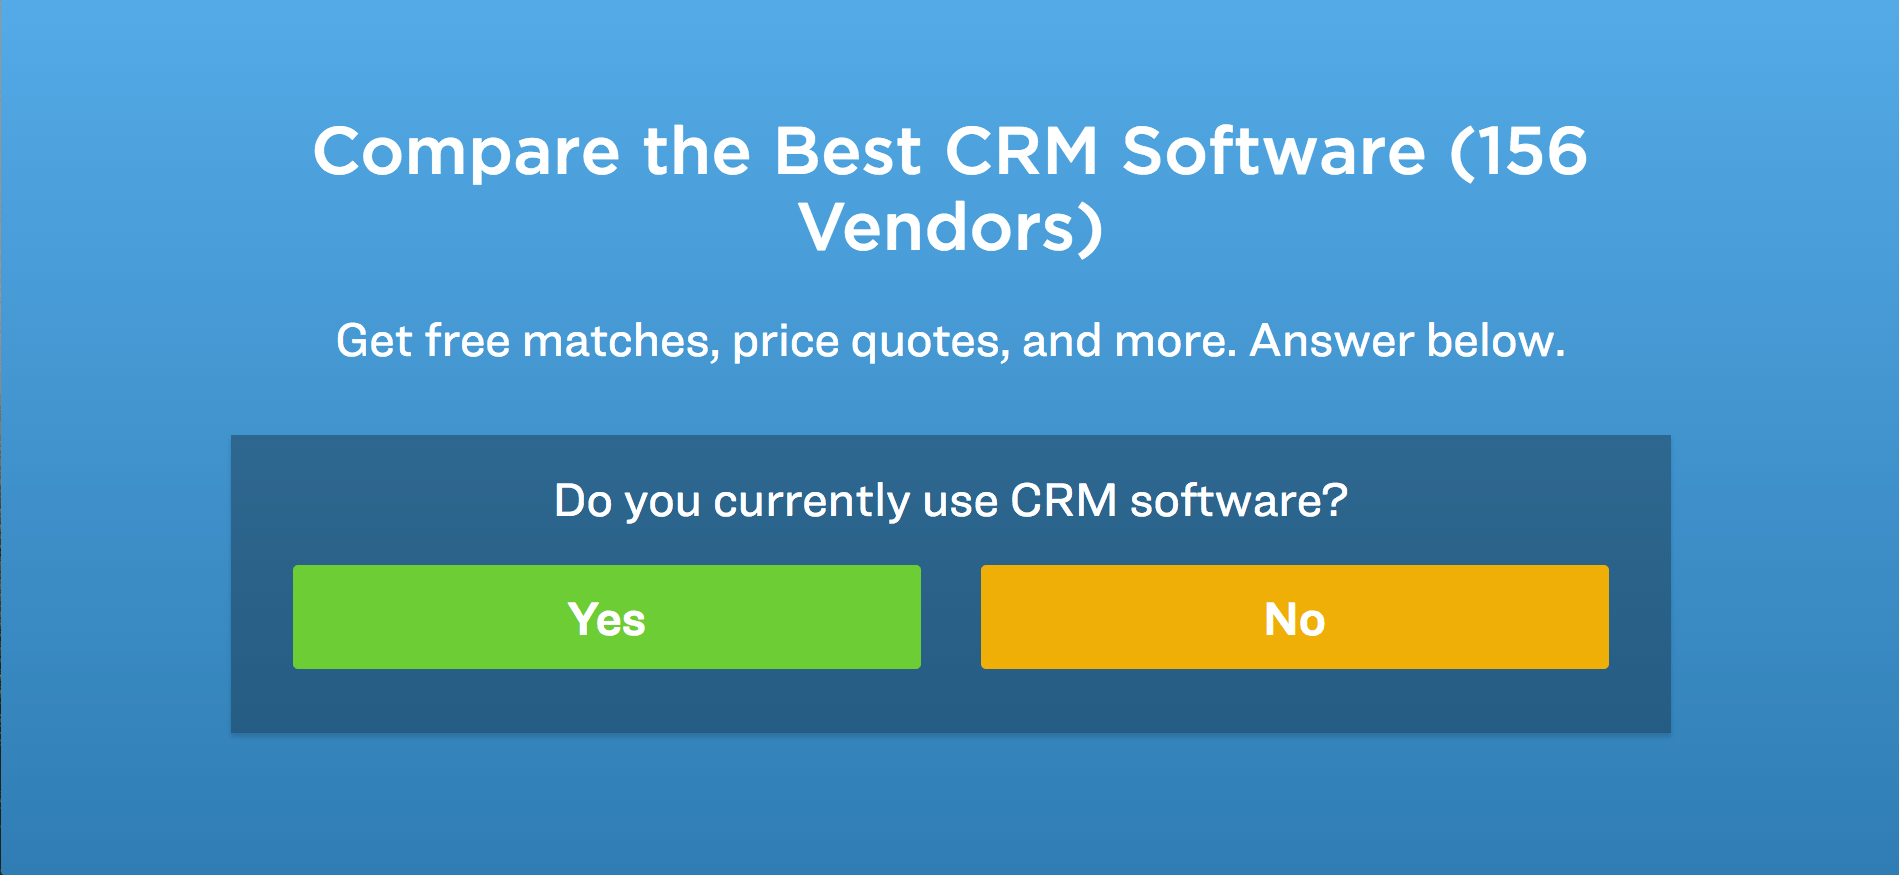 choose the best crm software